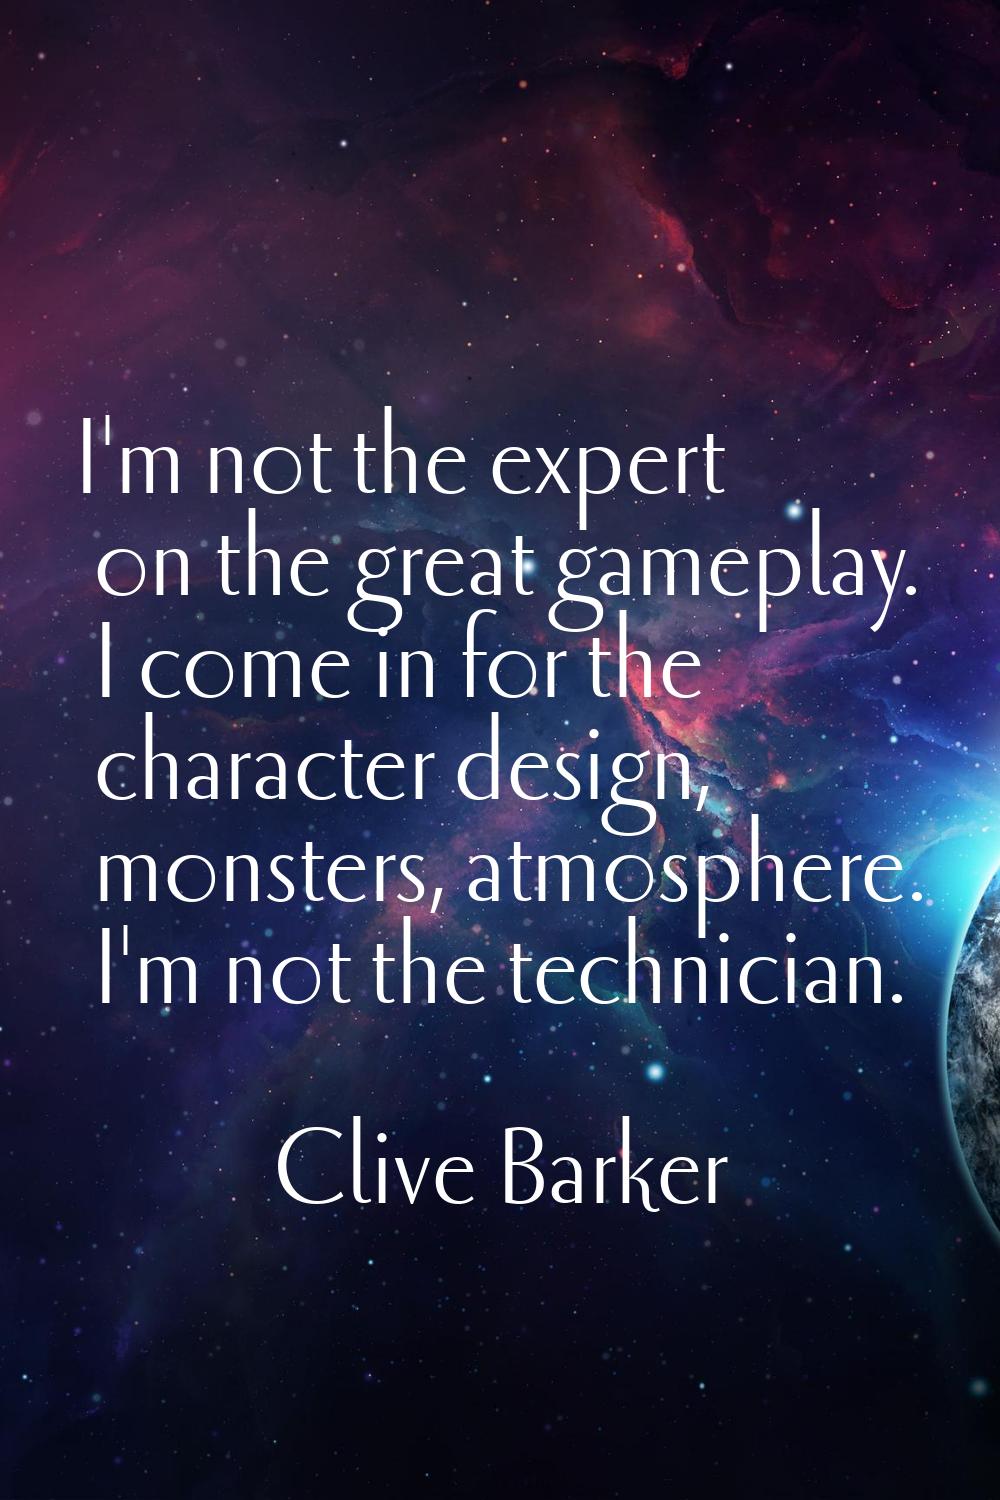 I'm not the expert on the great gameplay. I come in for the character design, monsters, atmosphere.